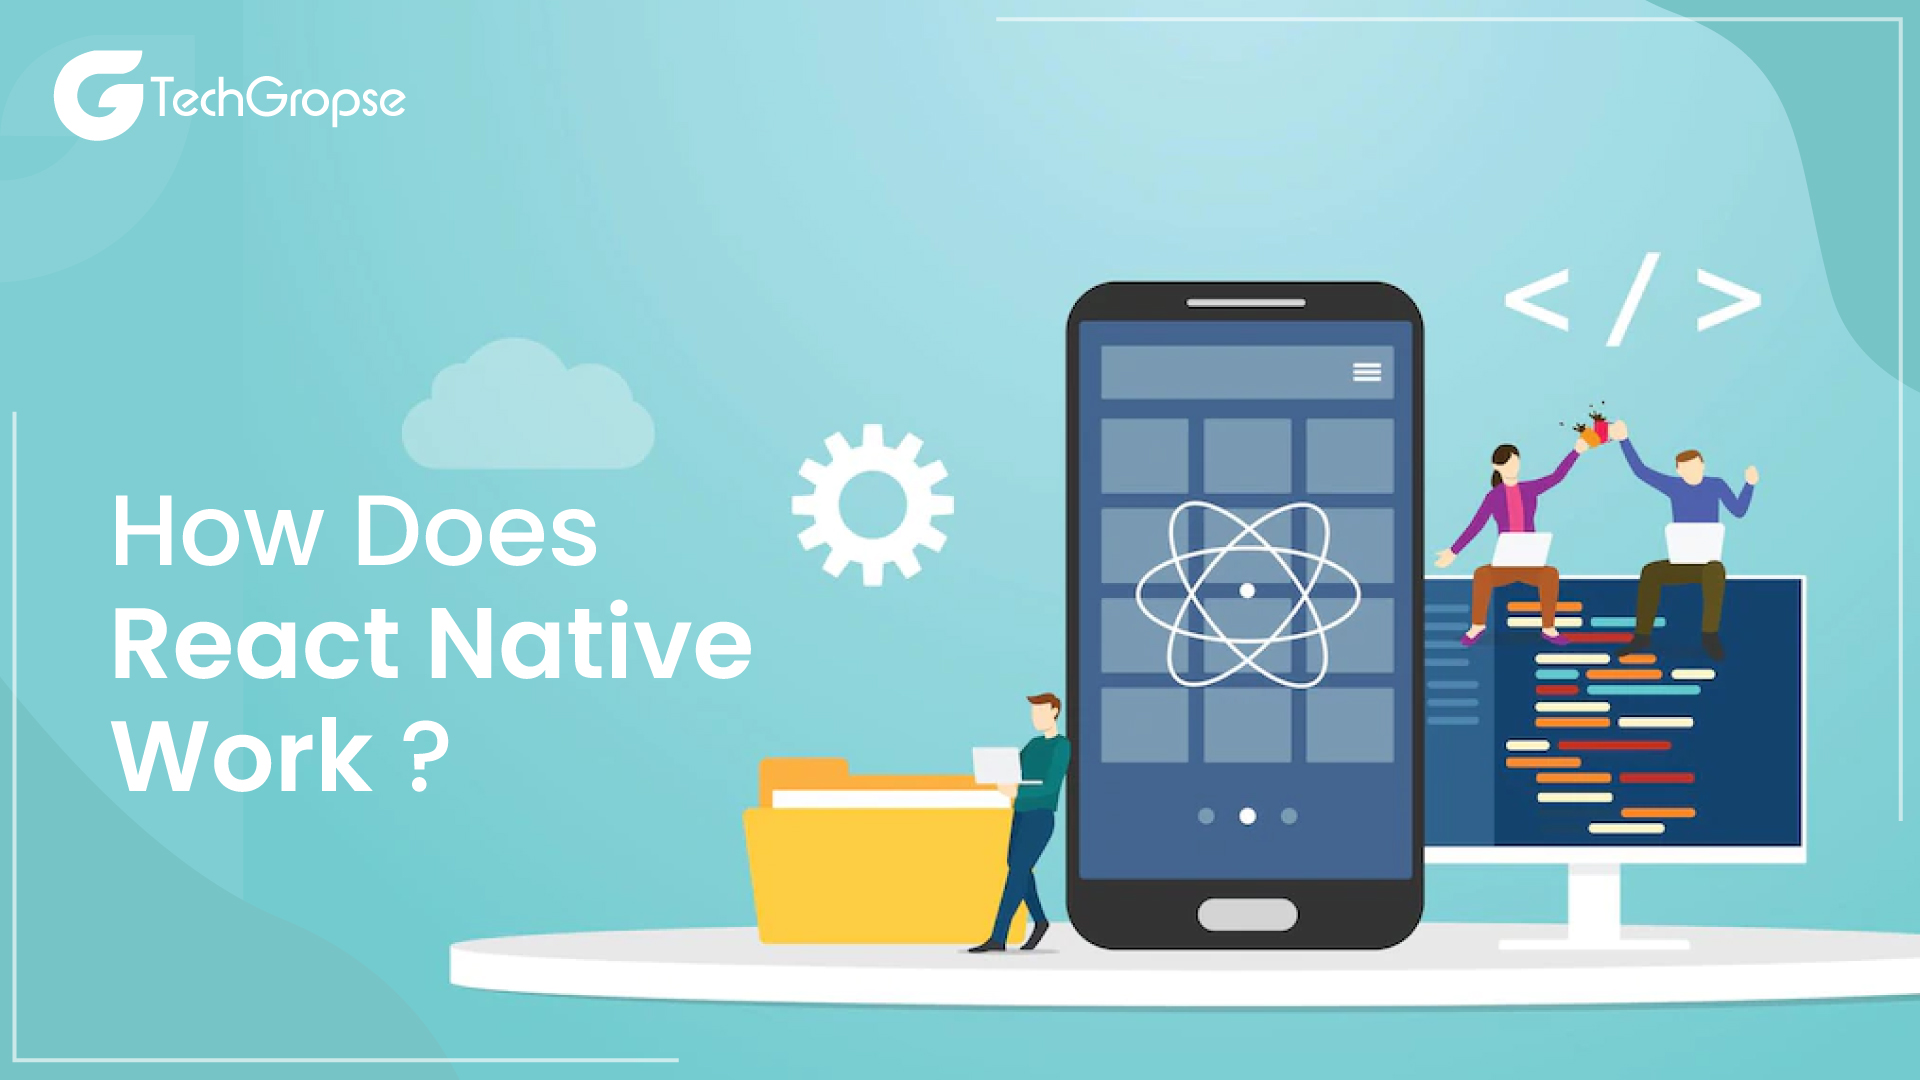 How does React Native work